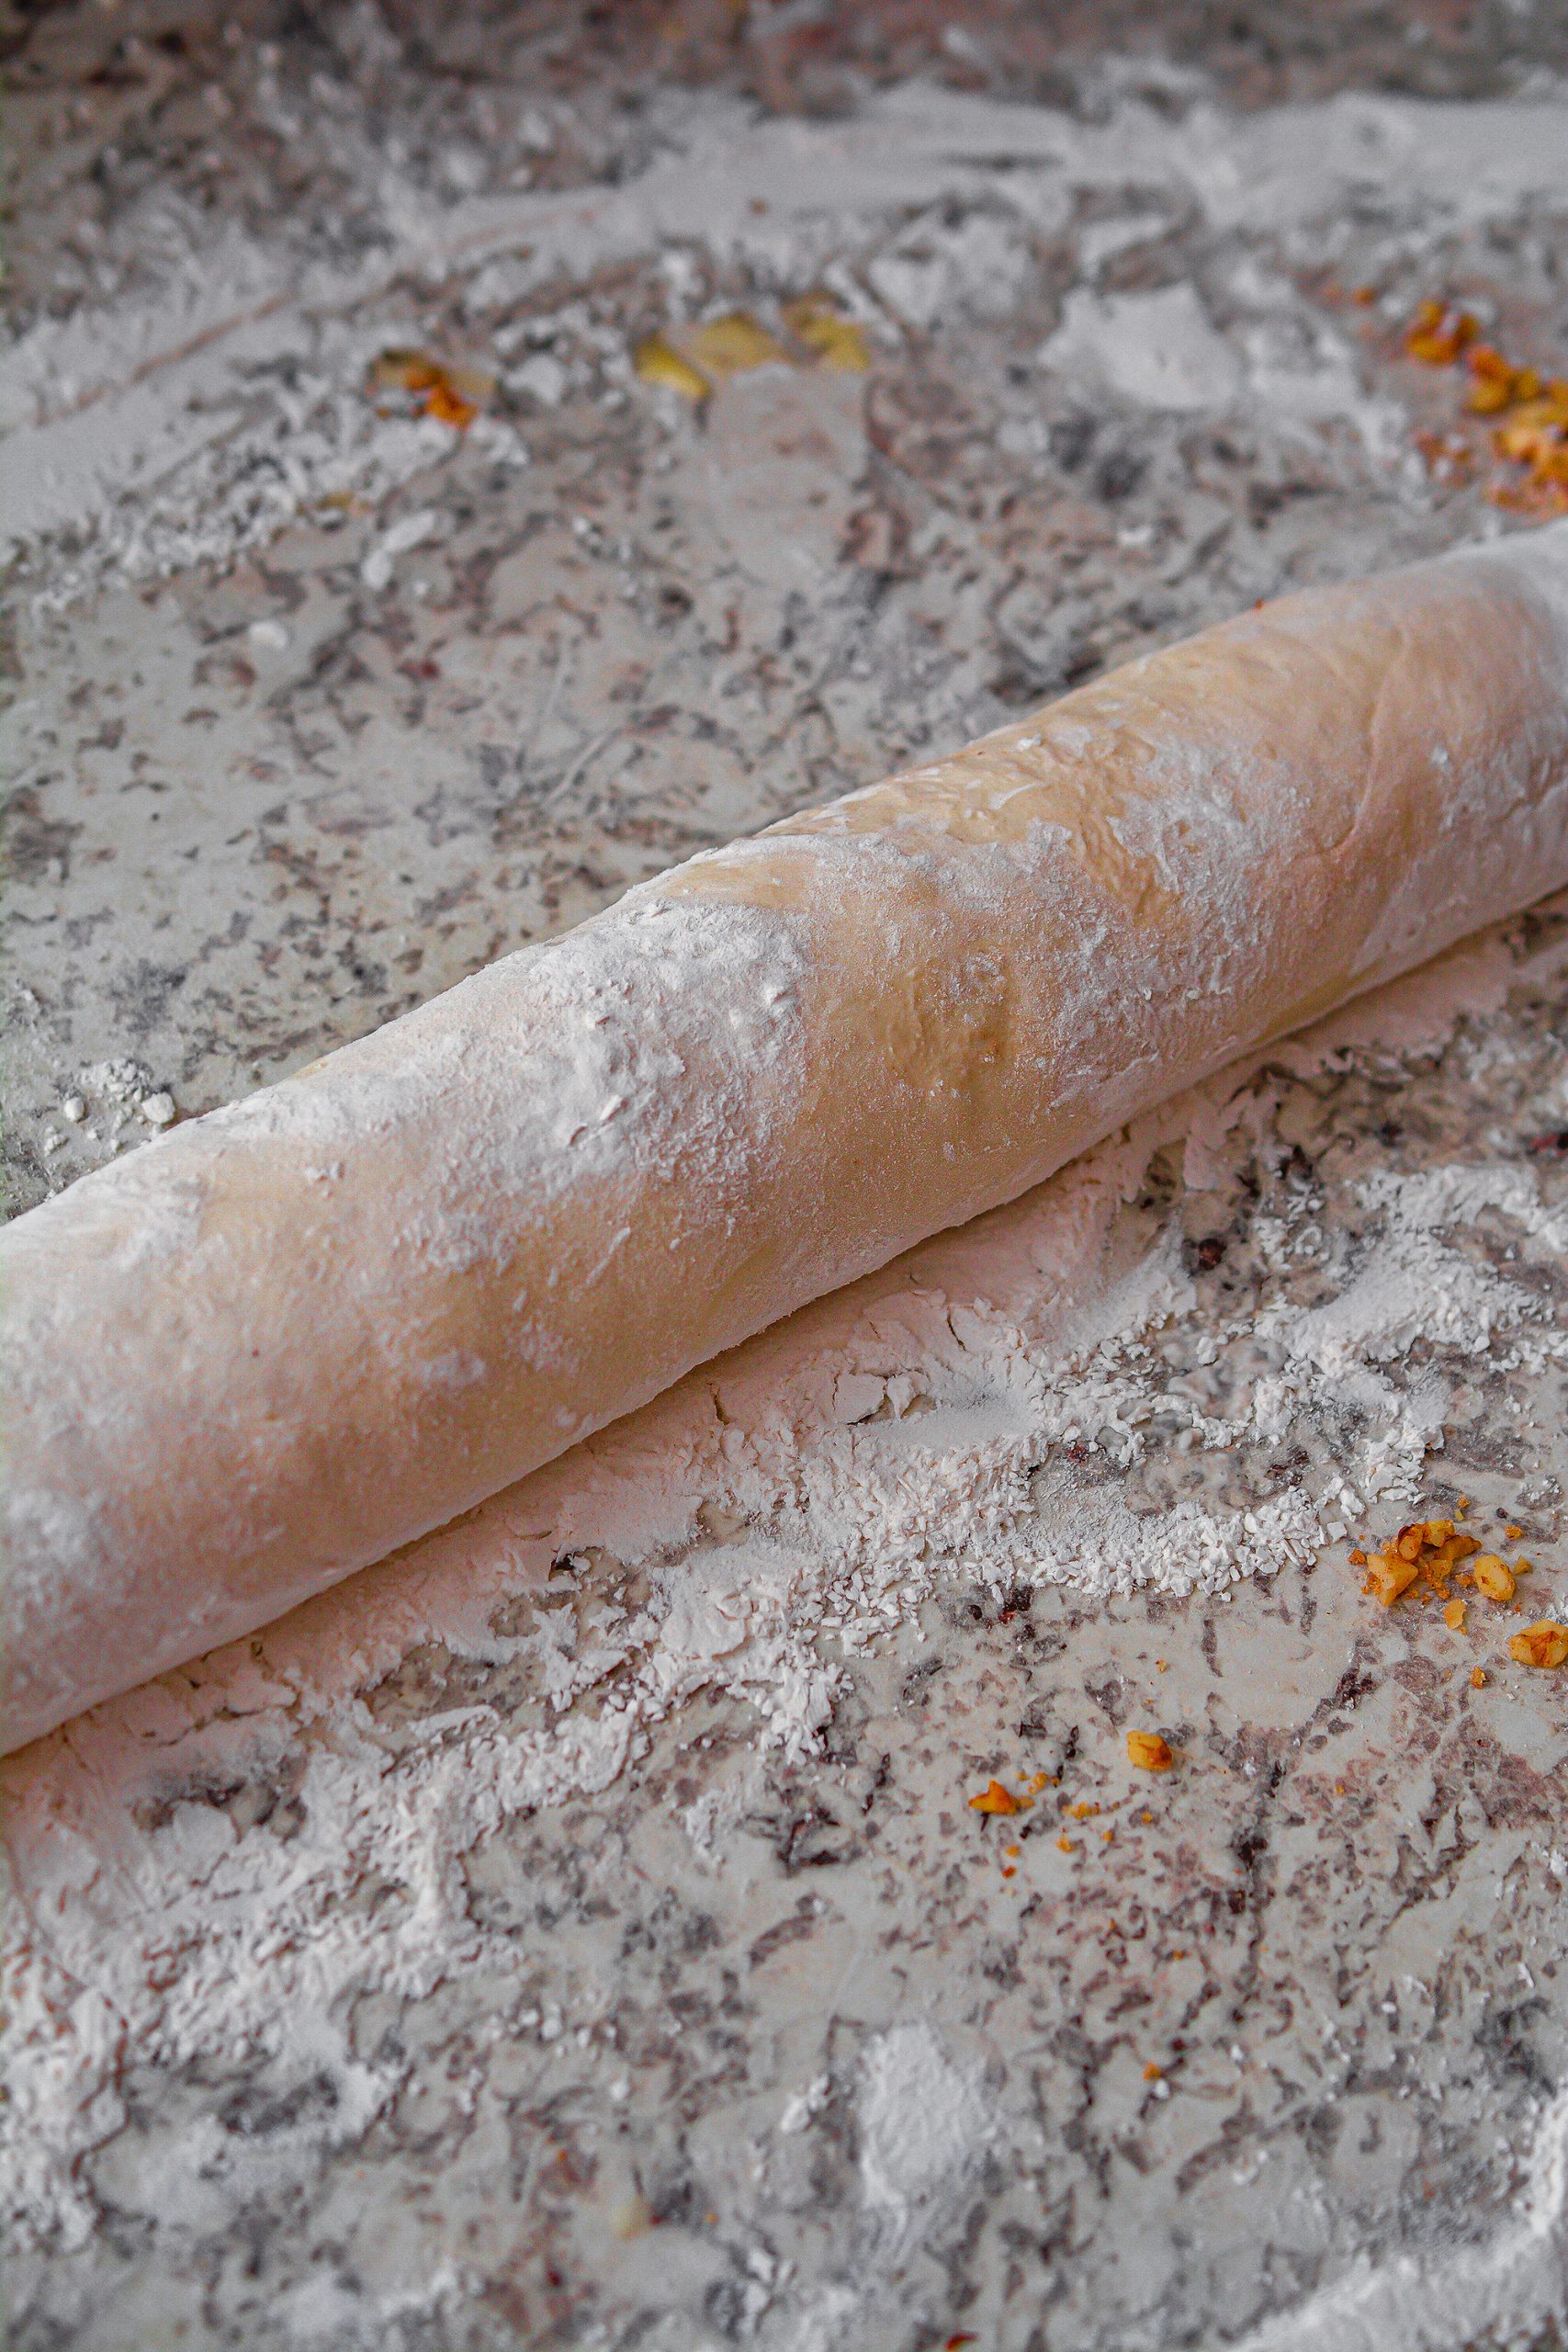 Roll the dough up tightly lengthwise, using the water to seal the dough closed.